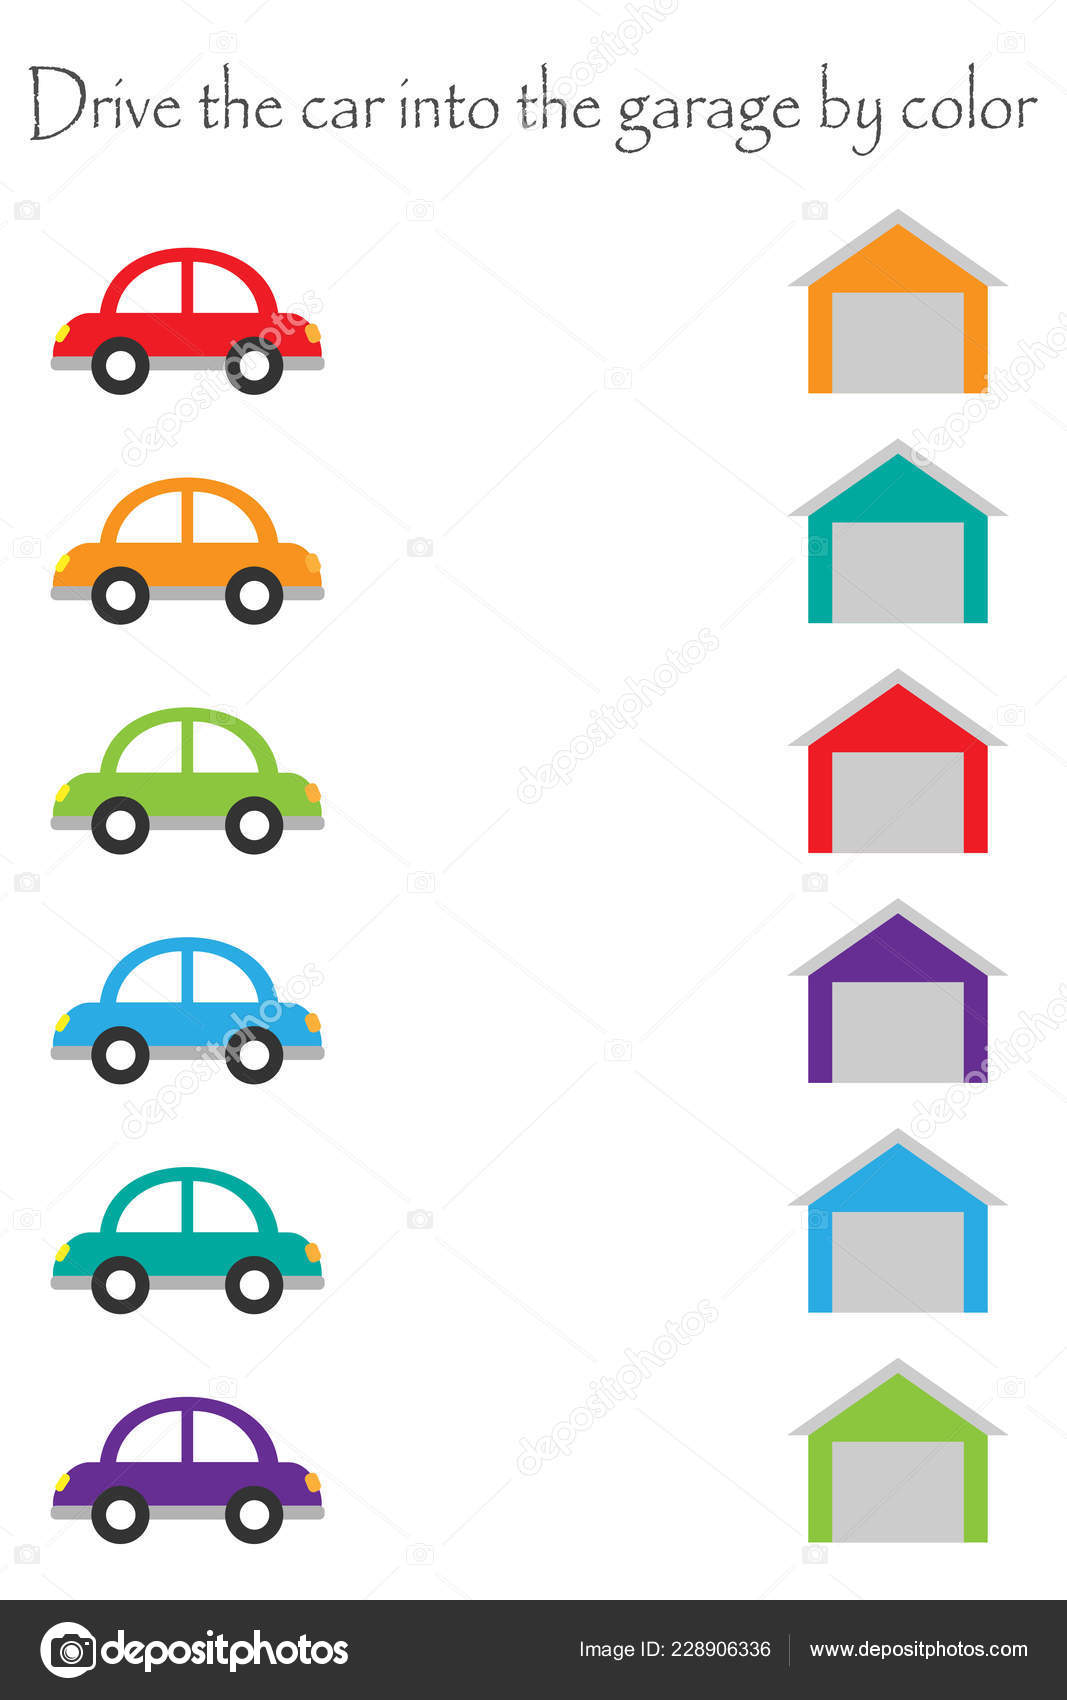 Drive Colorful Cars Cartoon Style Garages Color Children